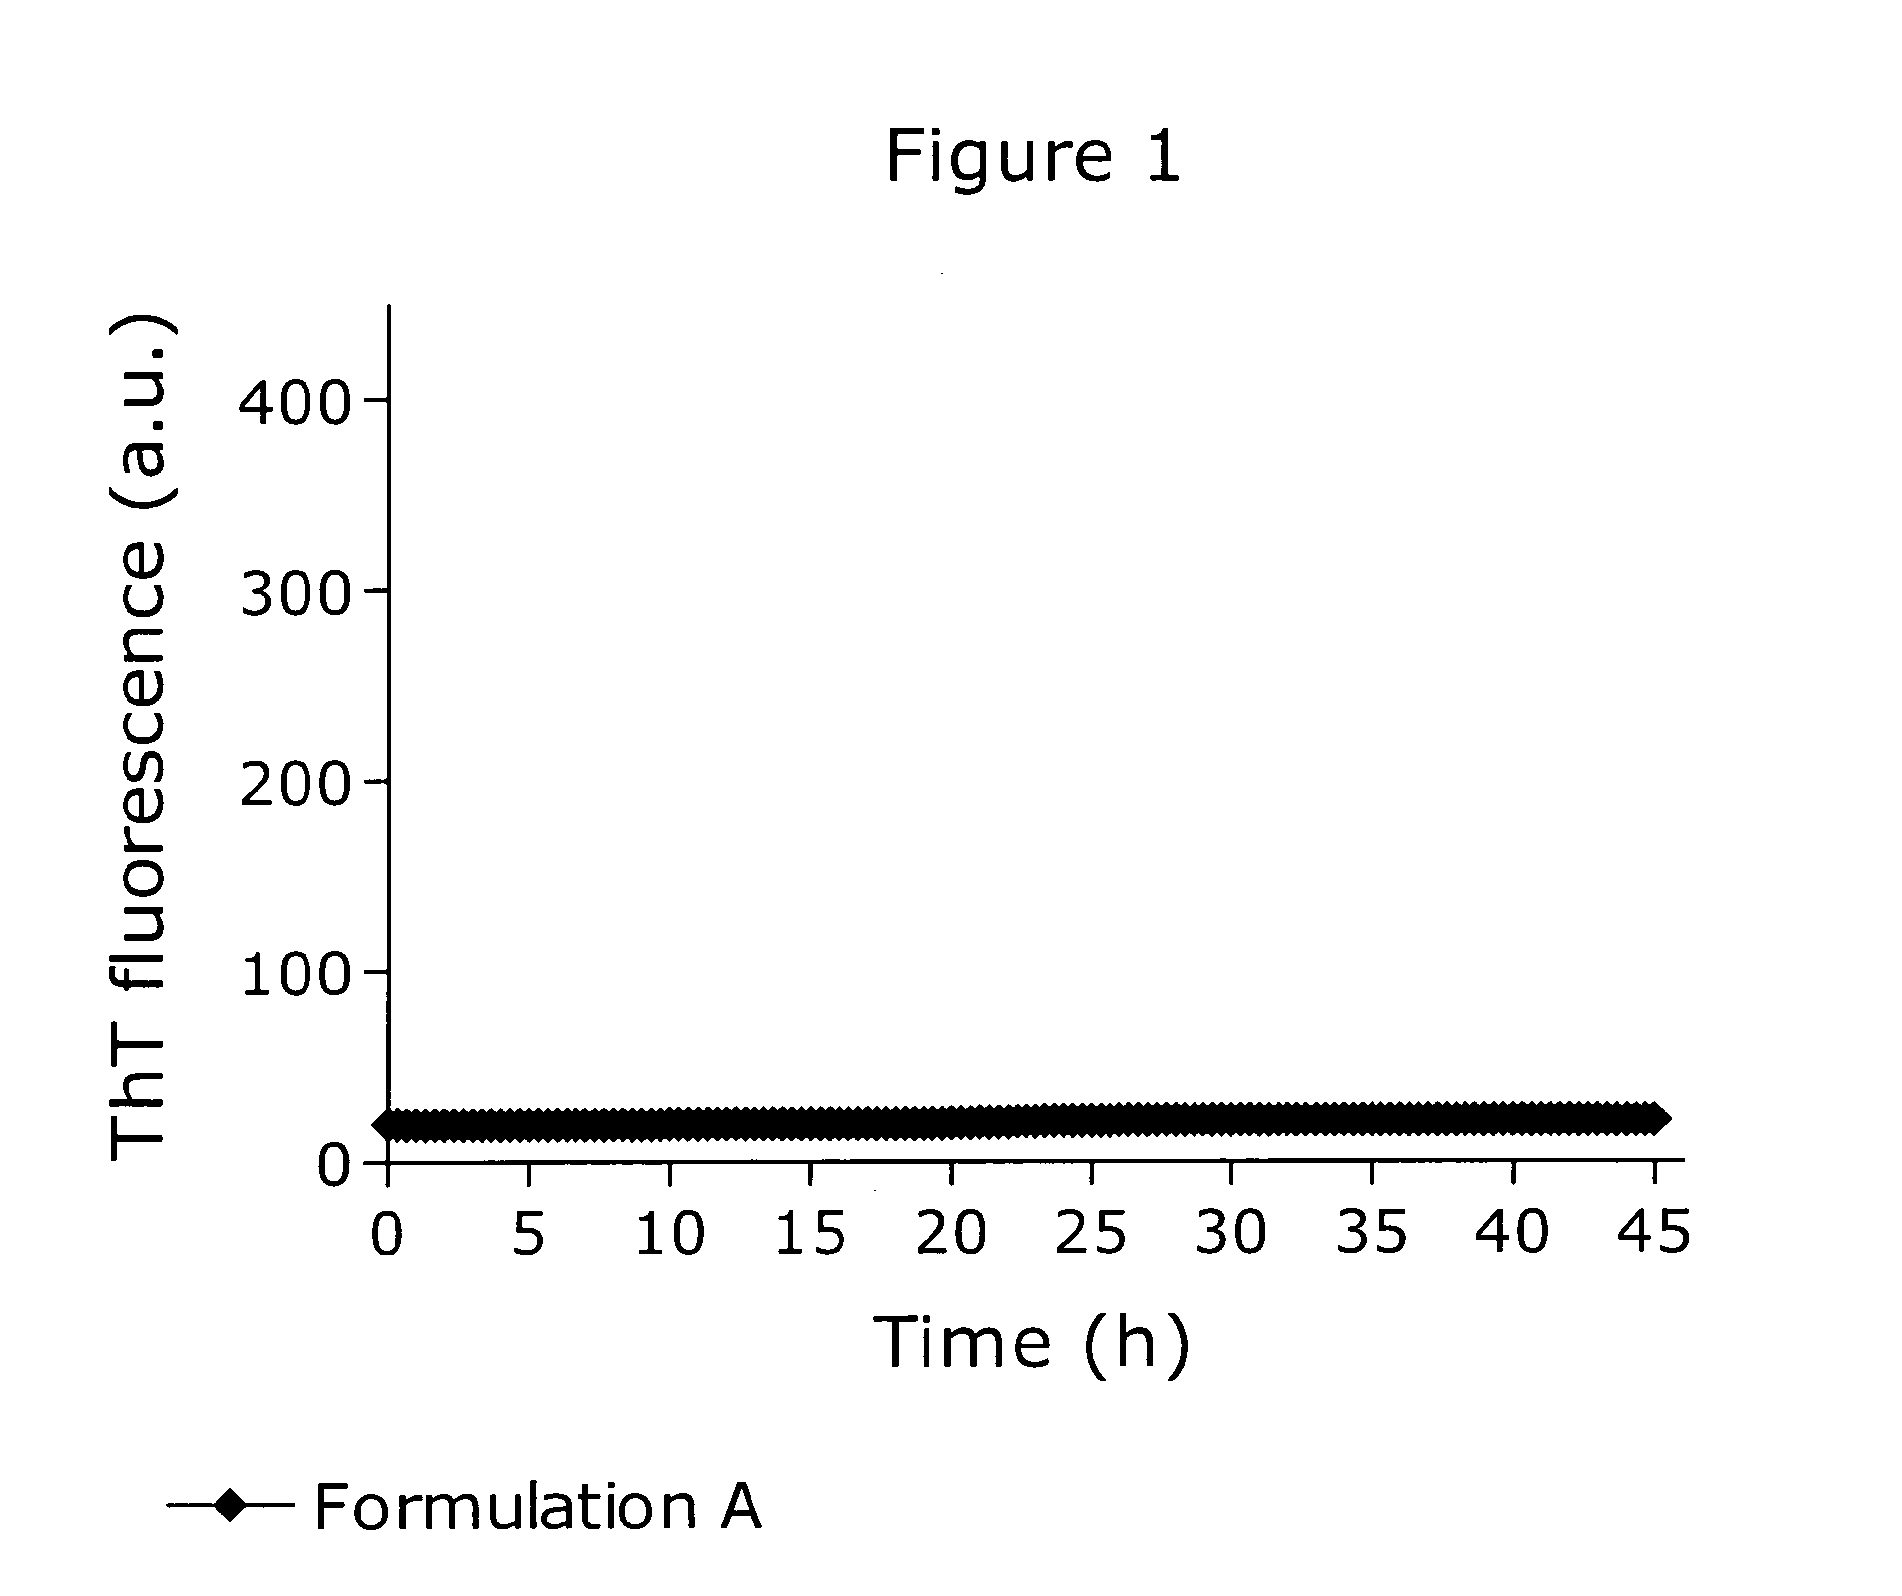 Stable formulations of amylin and its analogues